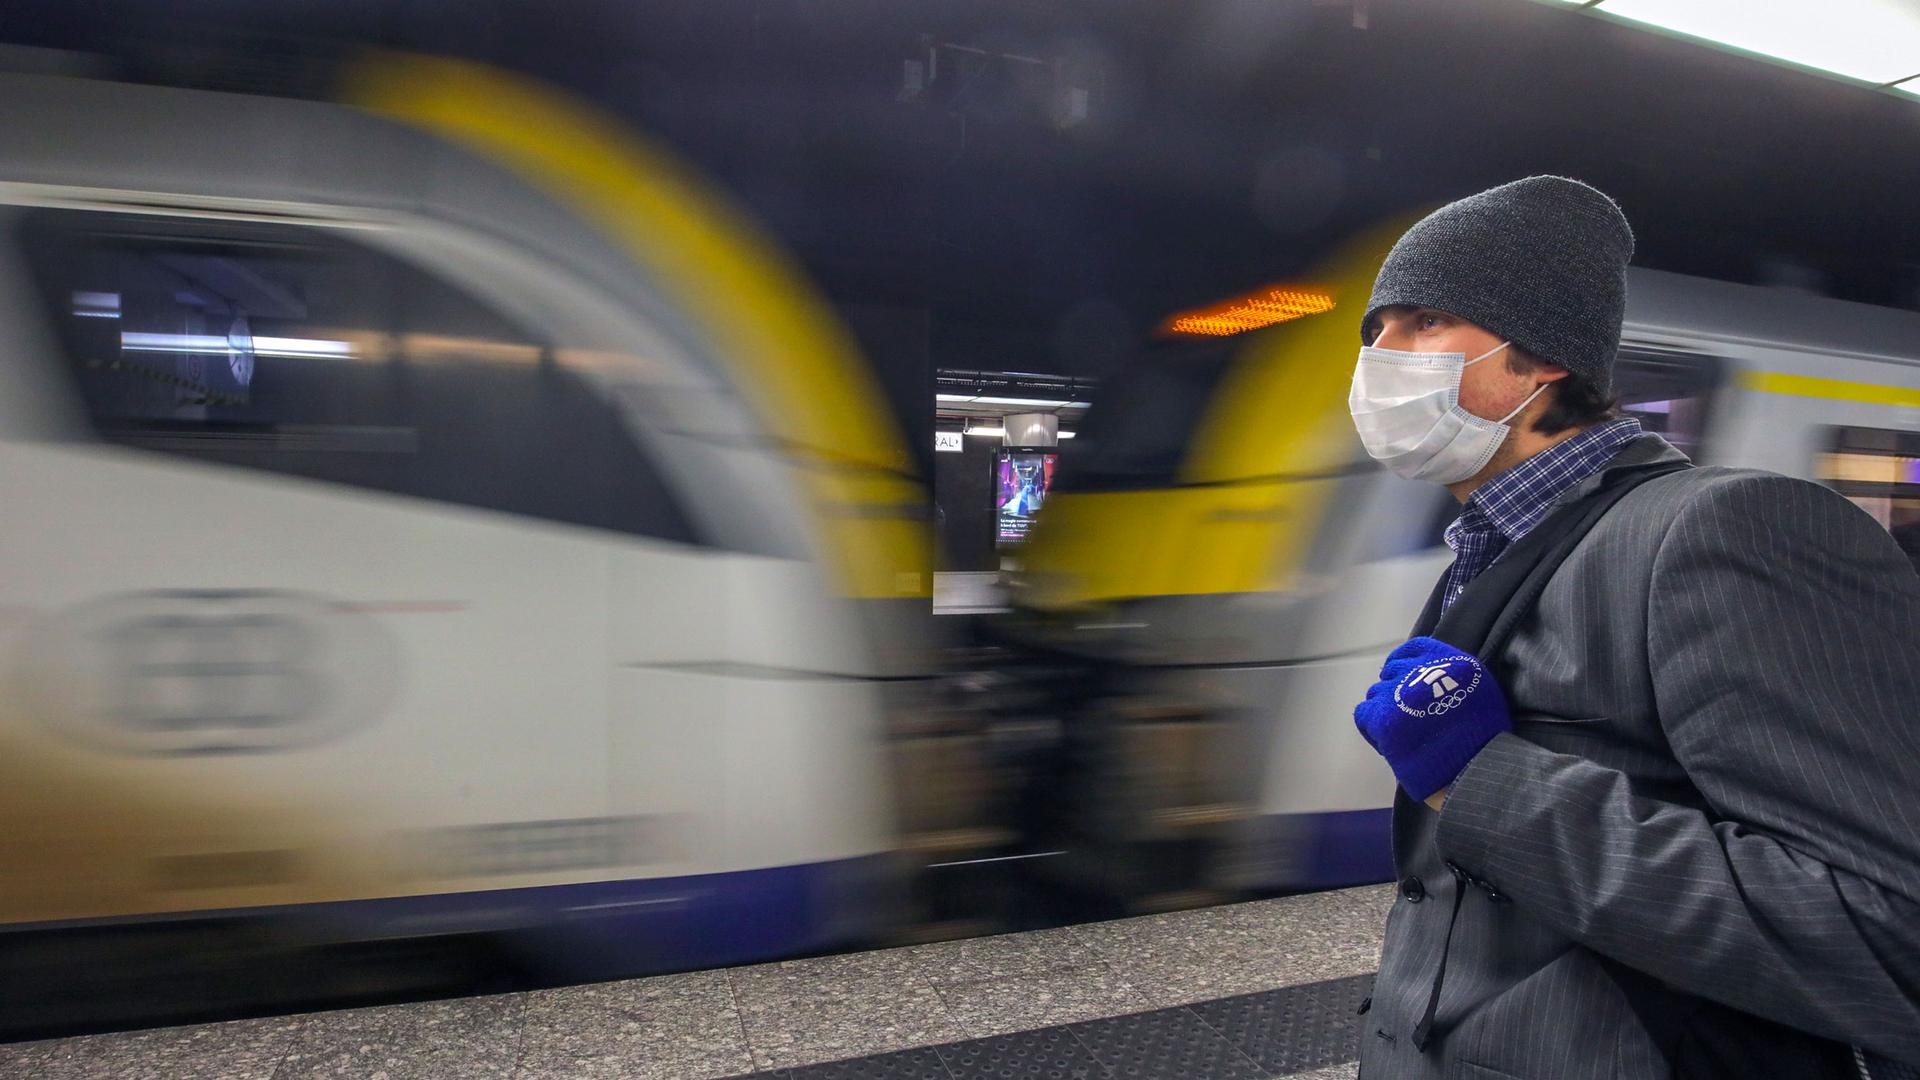 A man is shown wearing a face mask and winter hat as a train passed by in blurred motion.